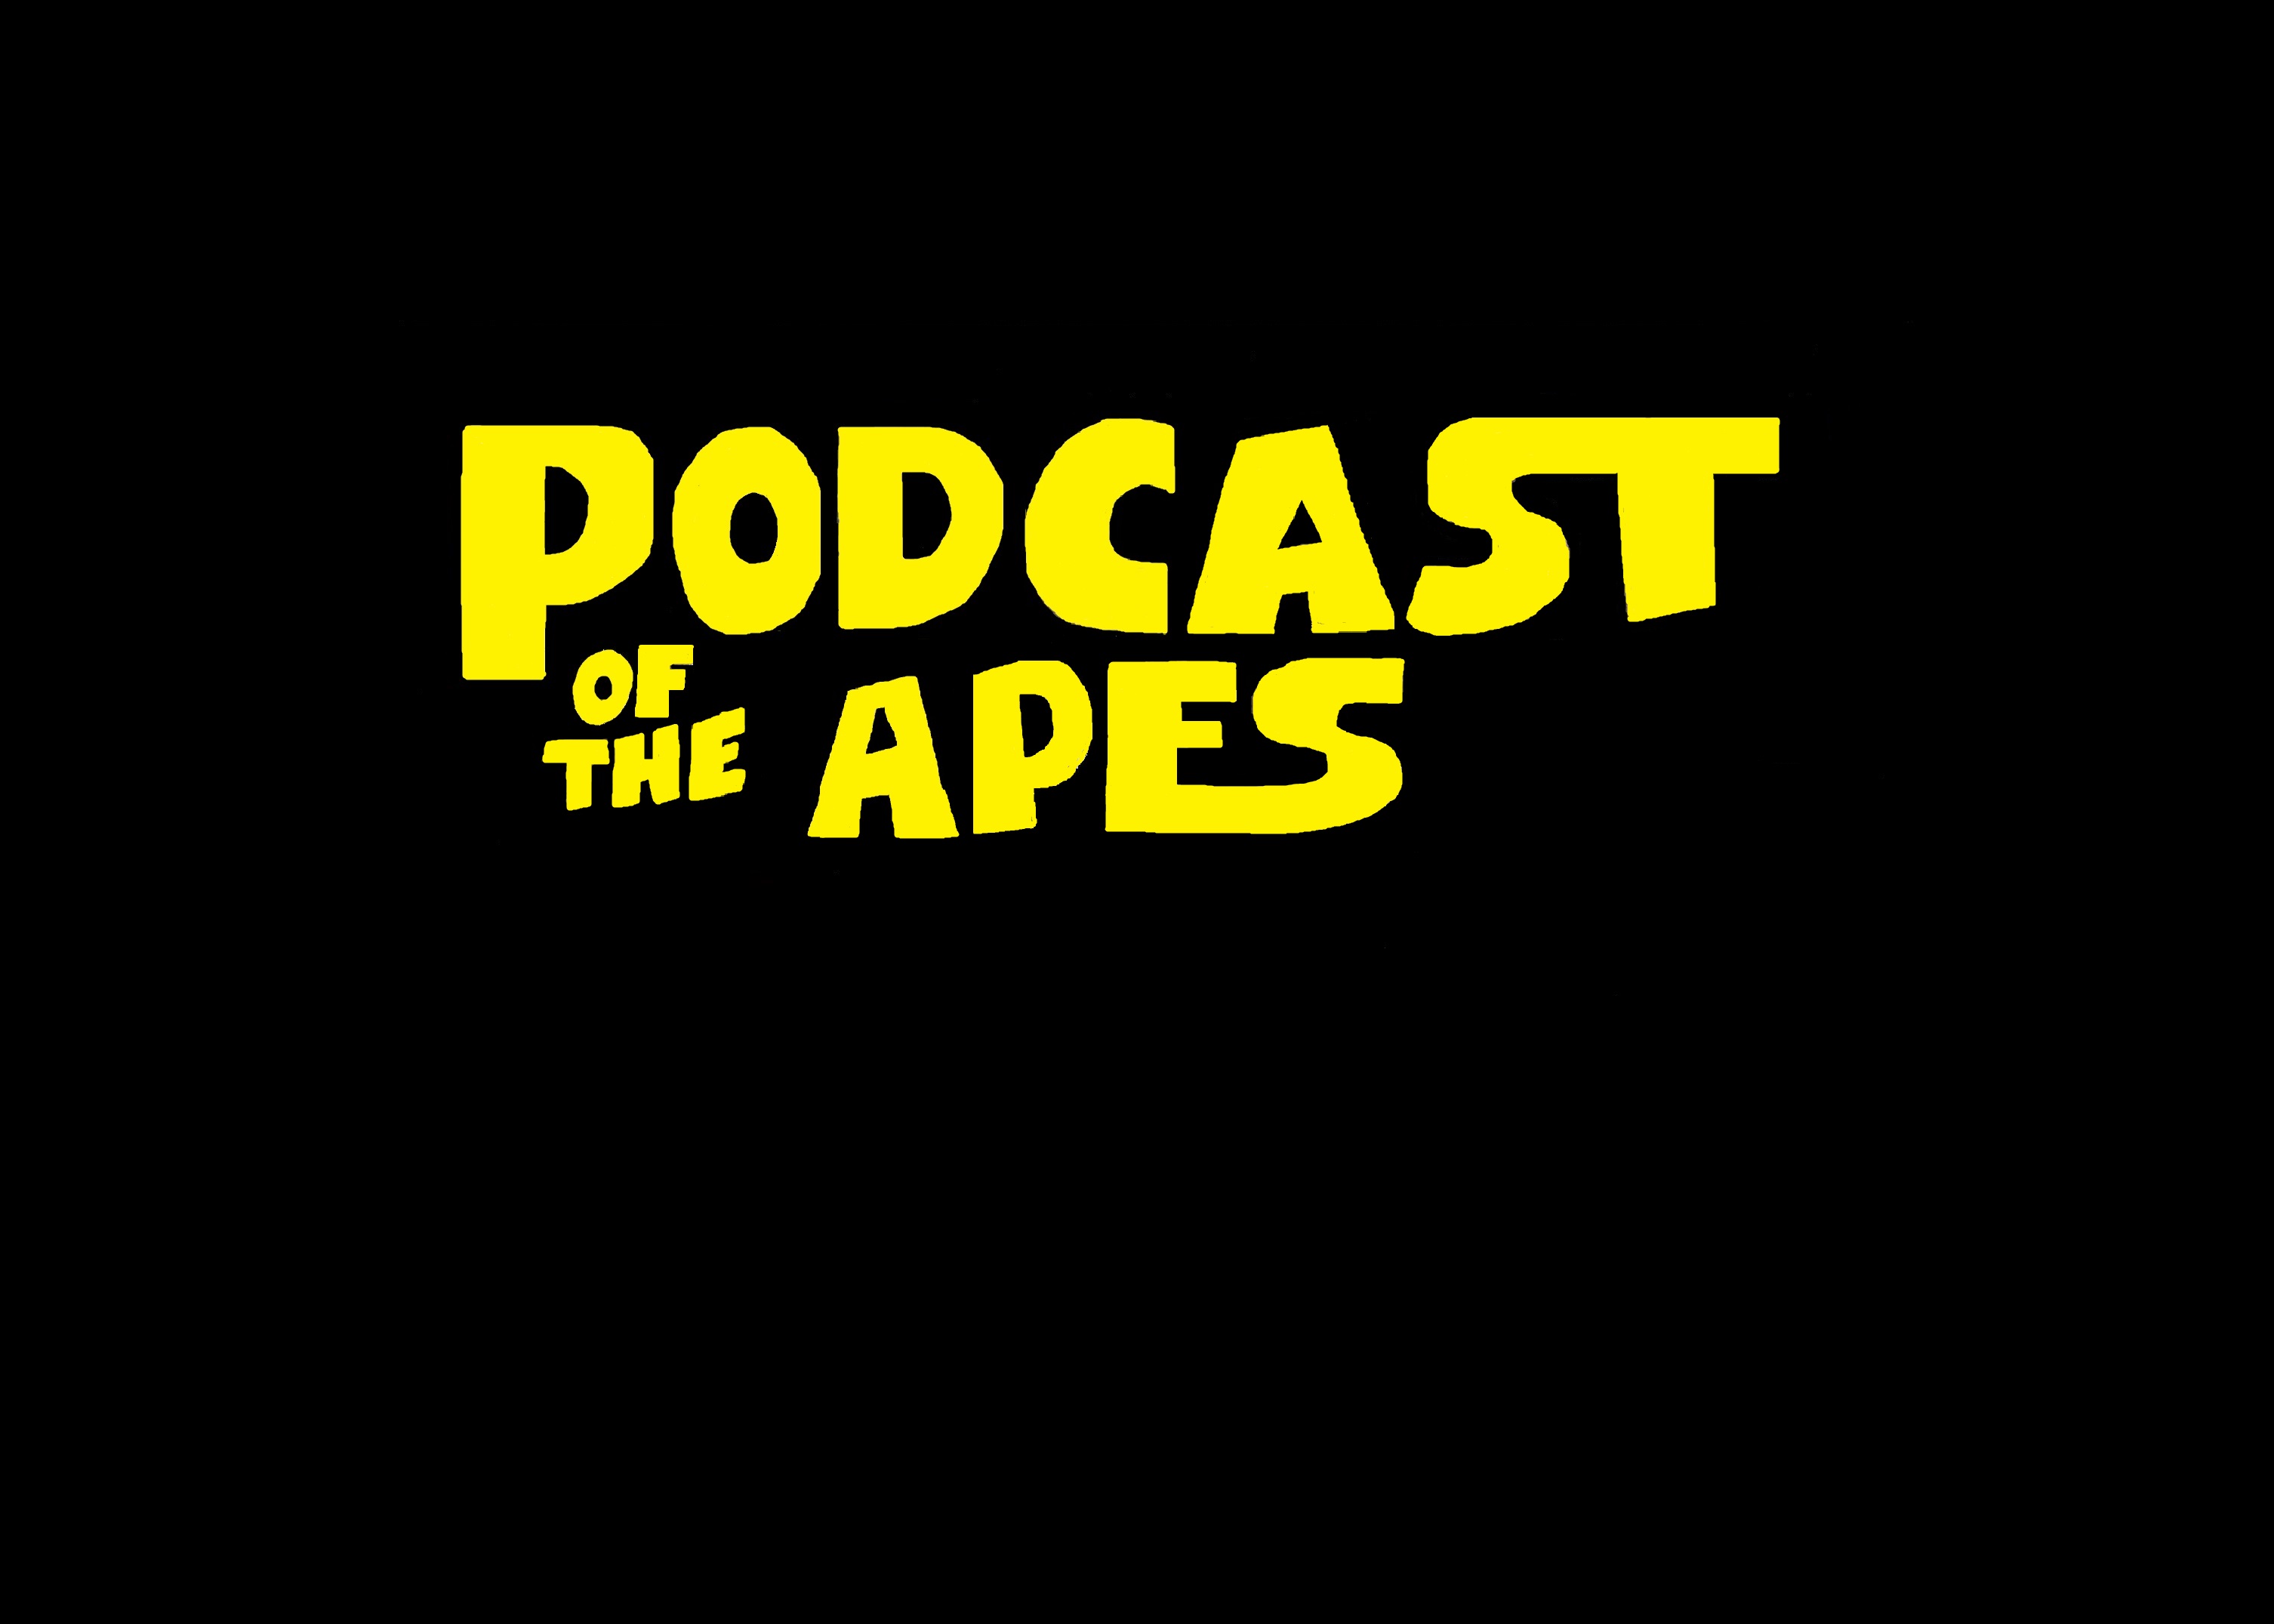 Podcast of the Apes Episode 21 - The Cure